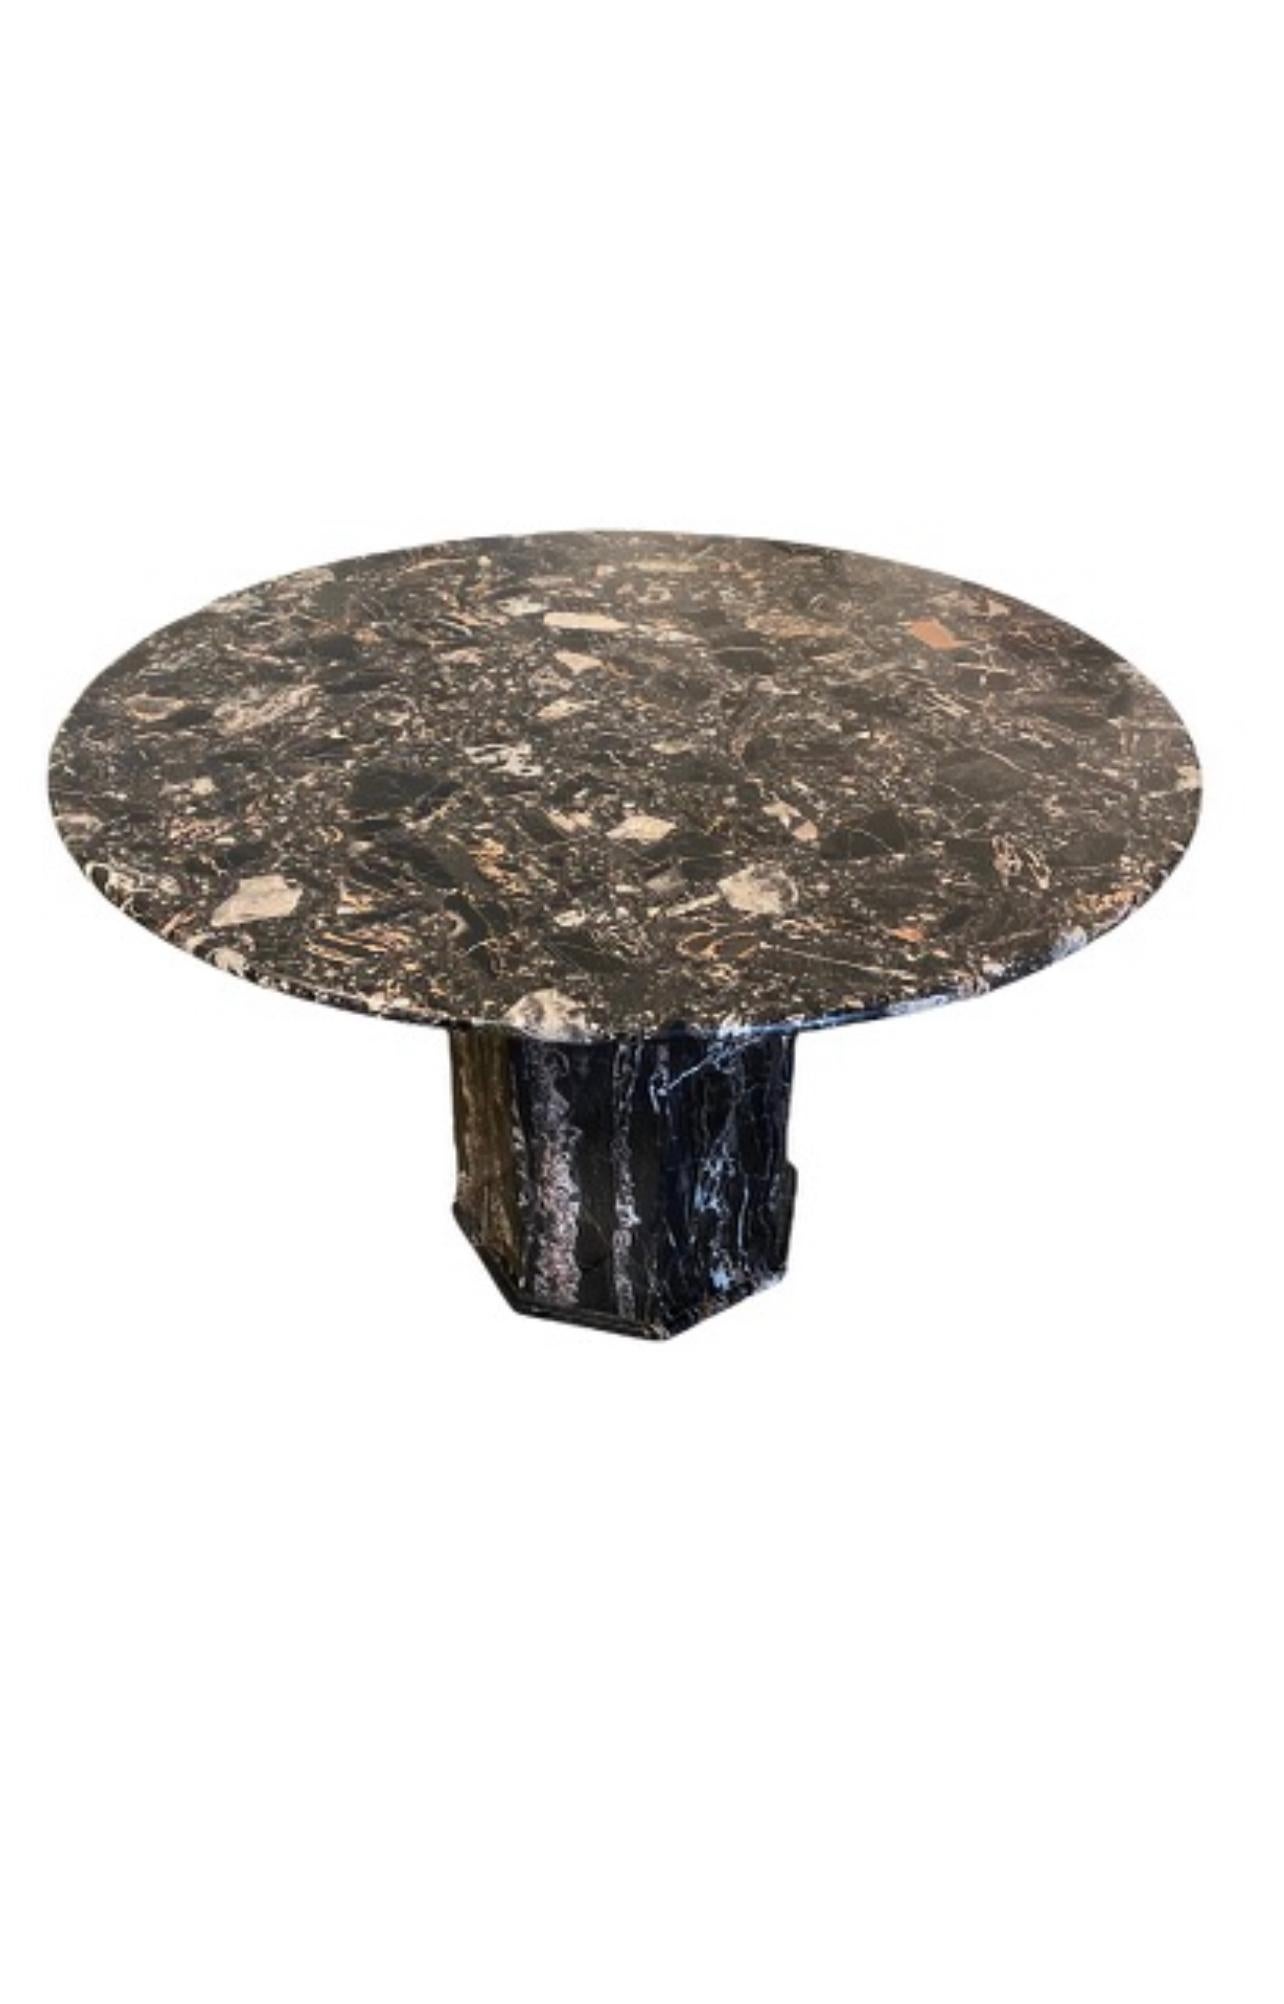 A center table in the of portoro marble 
Shades of black white and a beige/pink. Beautiful movement and coloration of the stone
Table has a modern deco feel..
The top seperates from the base for easier transport.